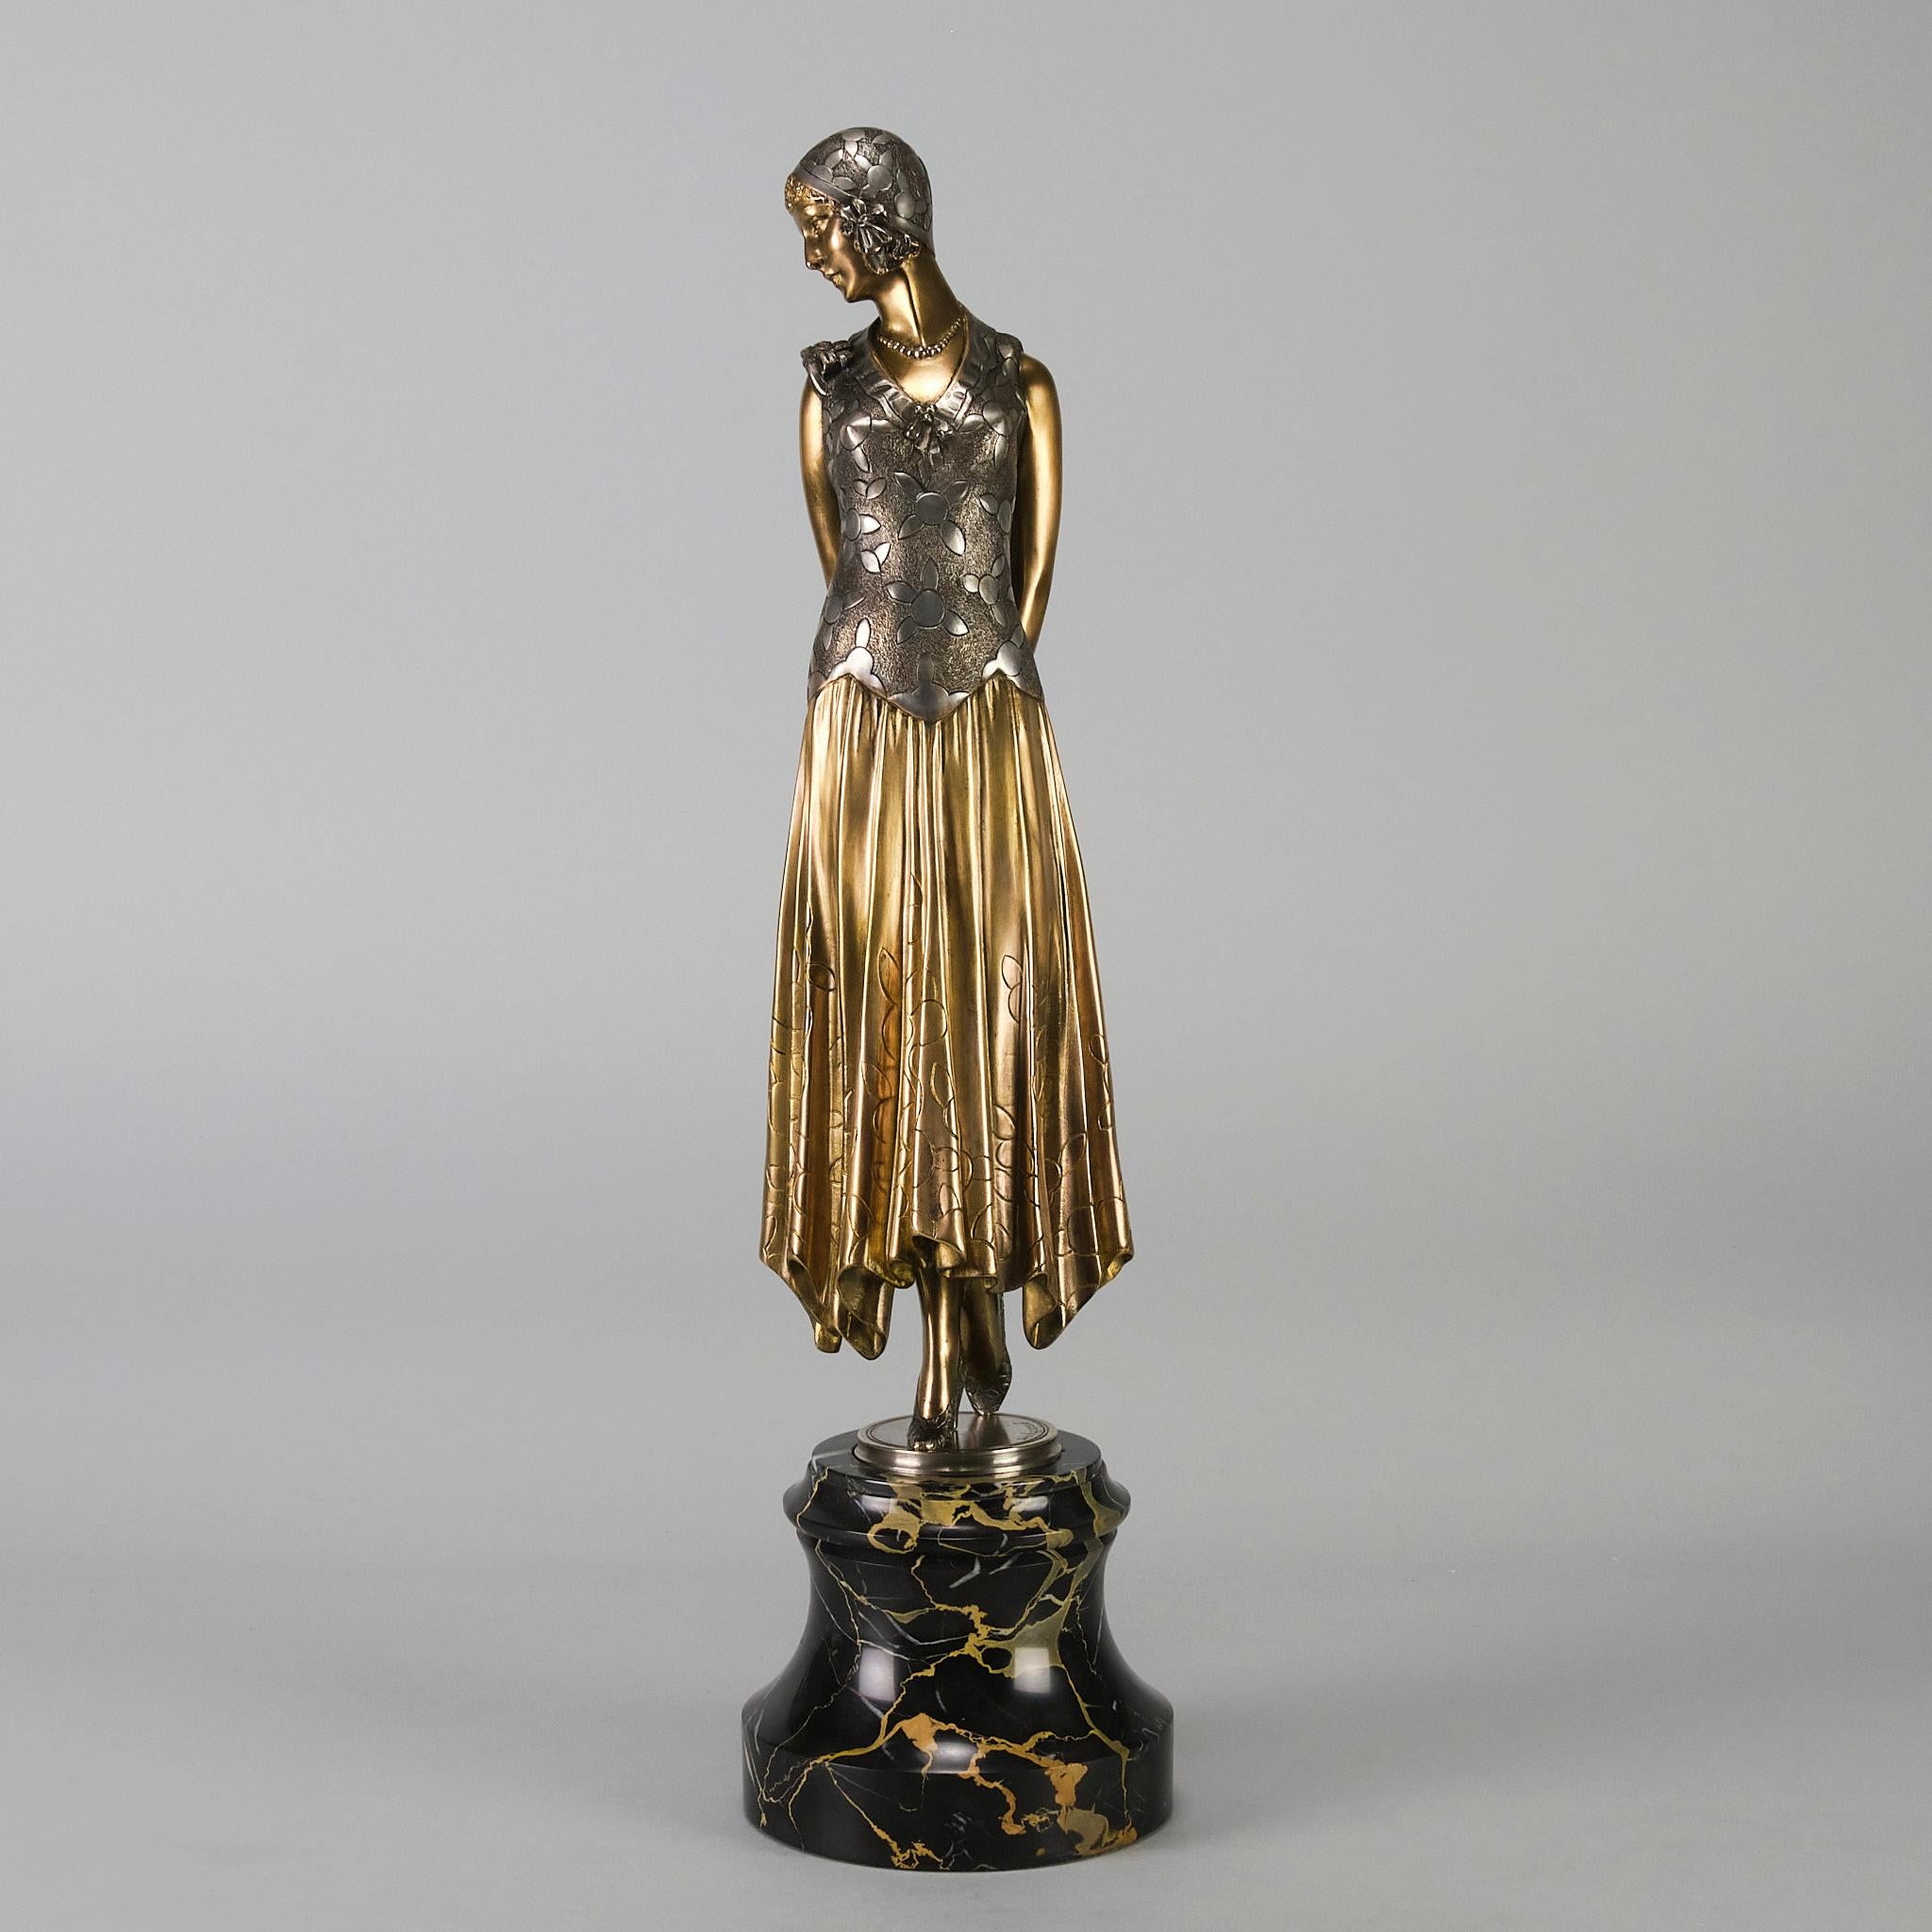 Carved Early 20th Century Art Deco Bronze Sculpture entitled 